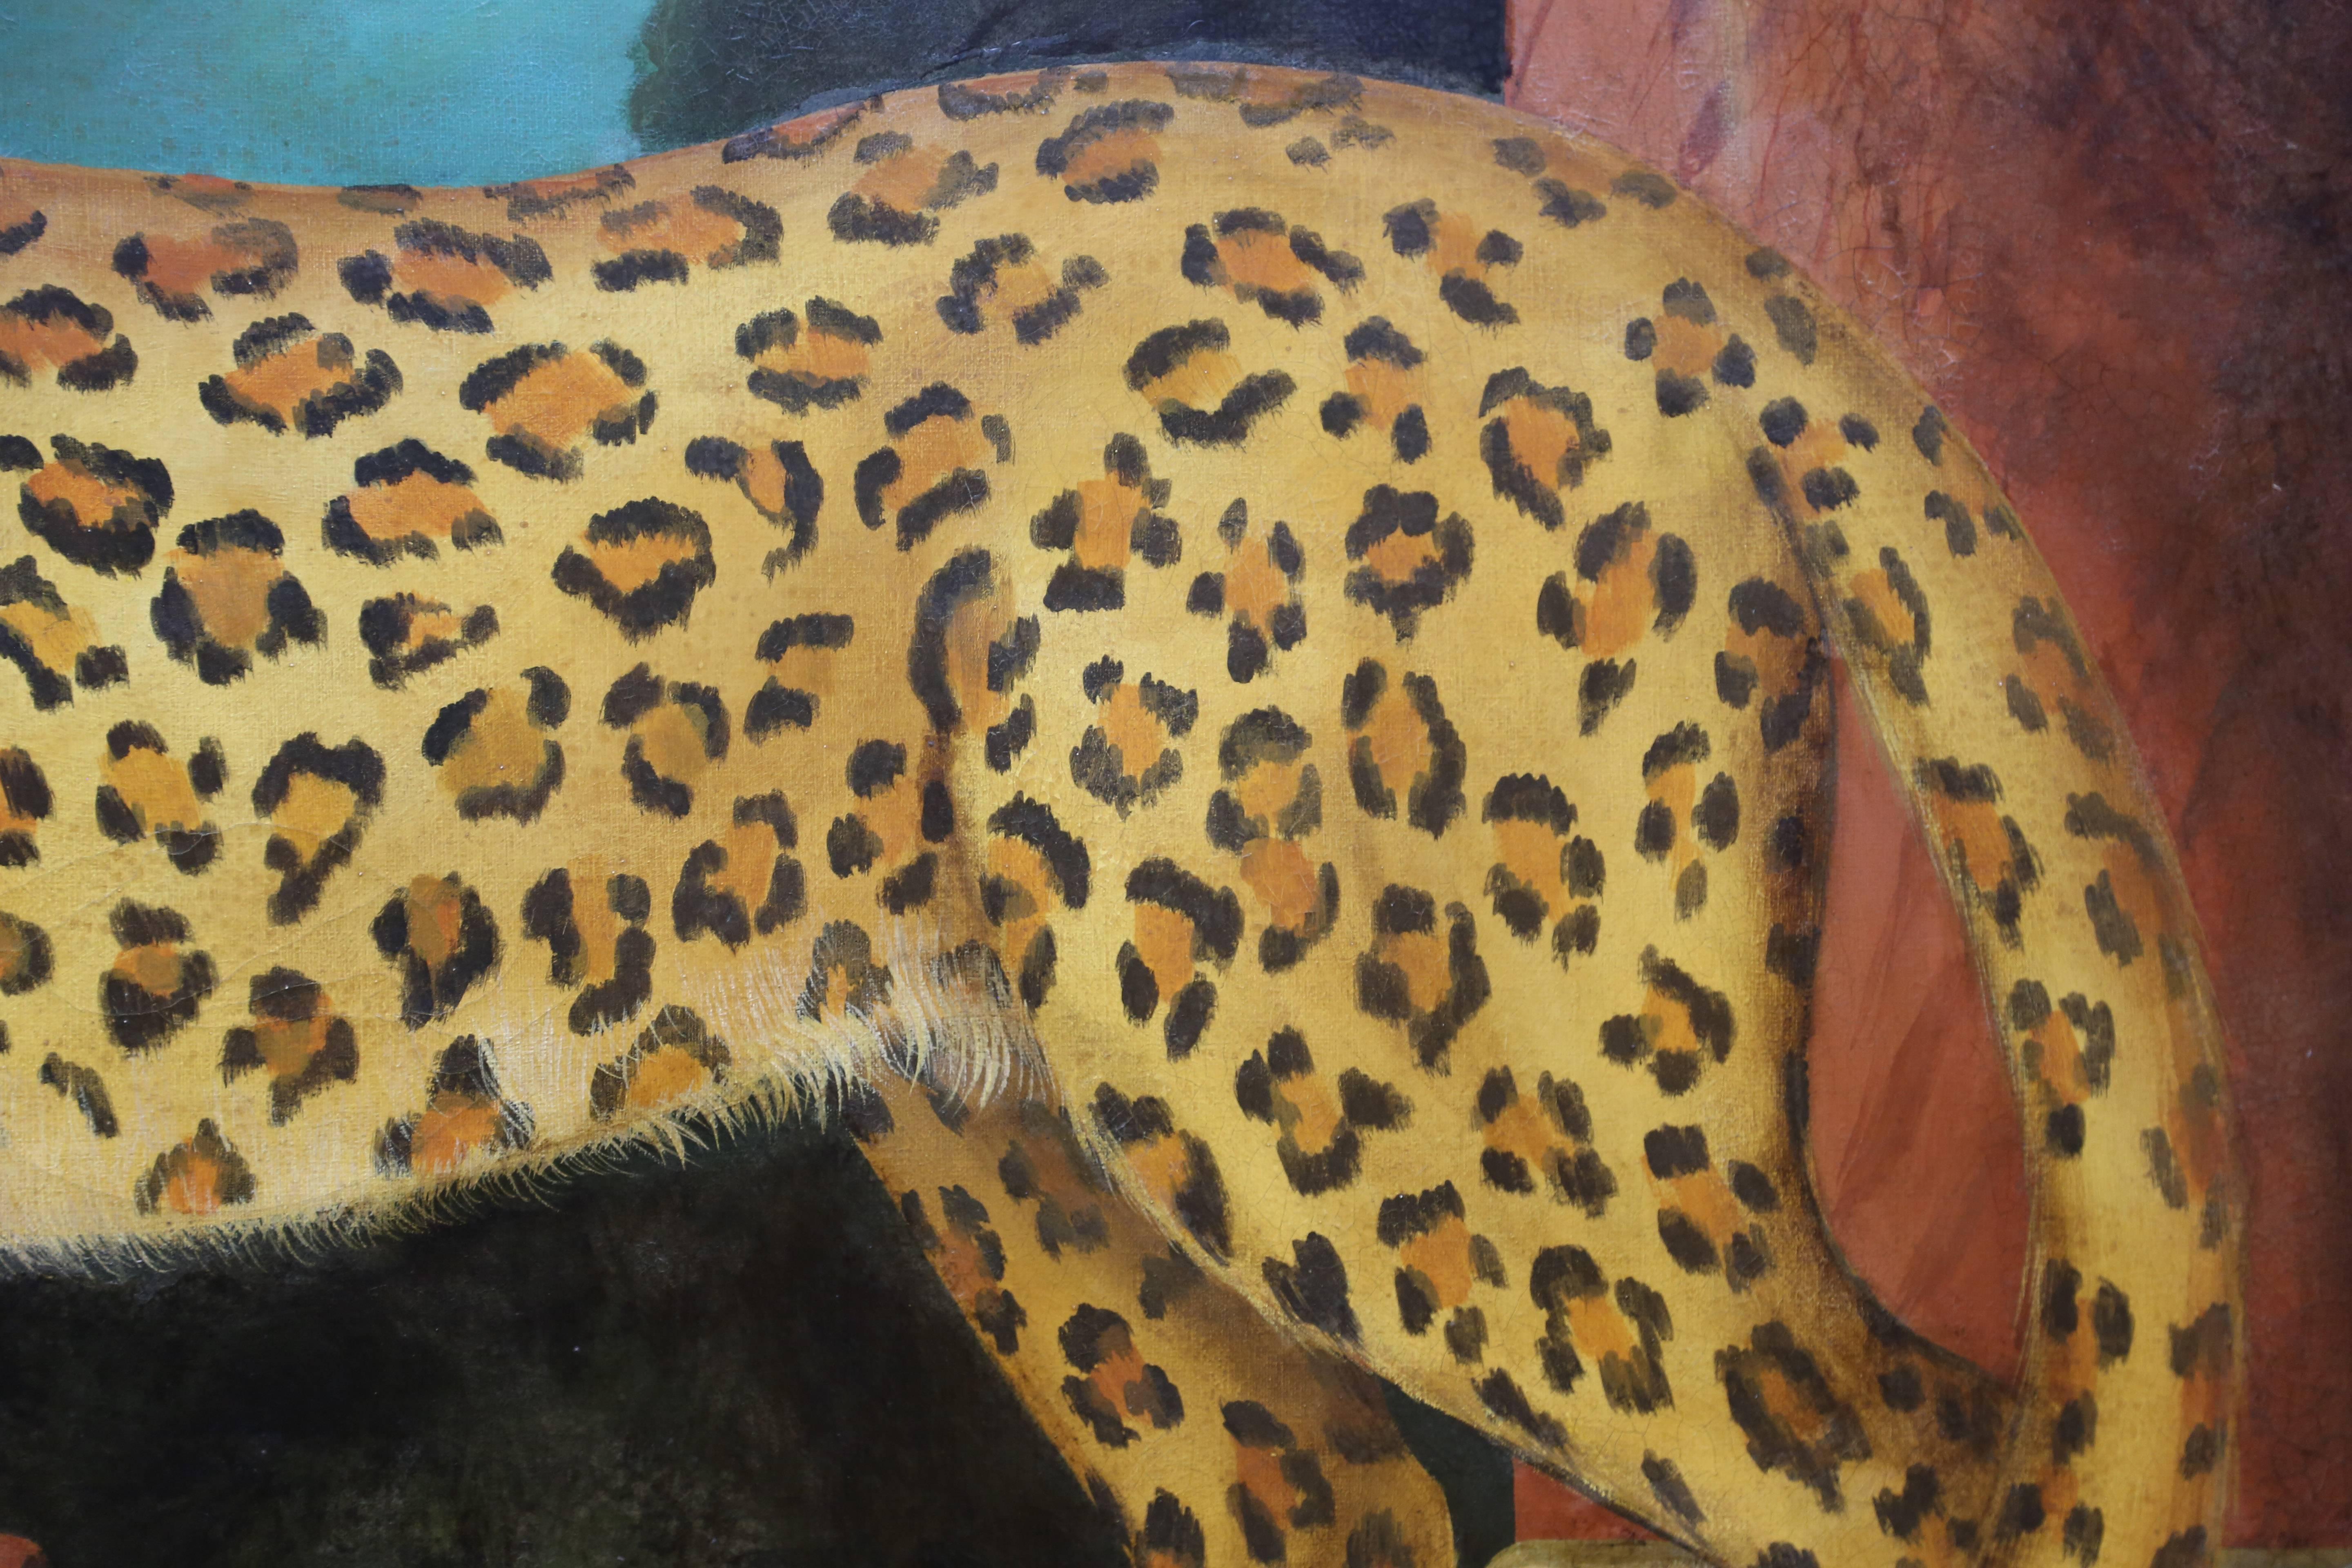 American Grand Scale Painting of Leopard by Wm.Skilling